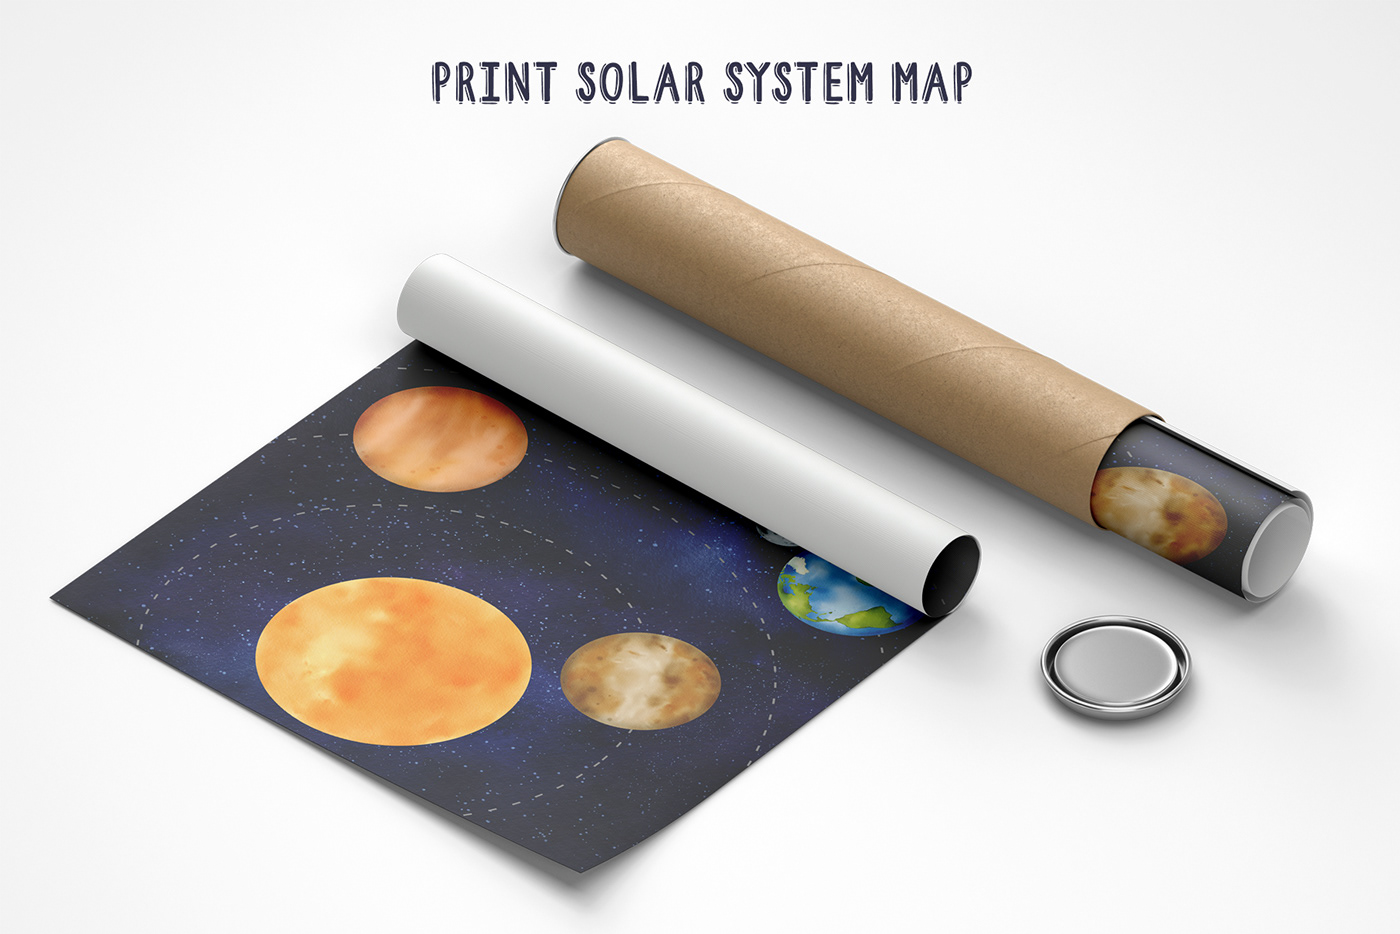 Printing a map of the solar system. Digital watercolor